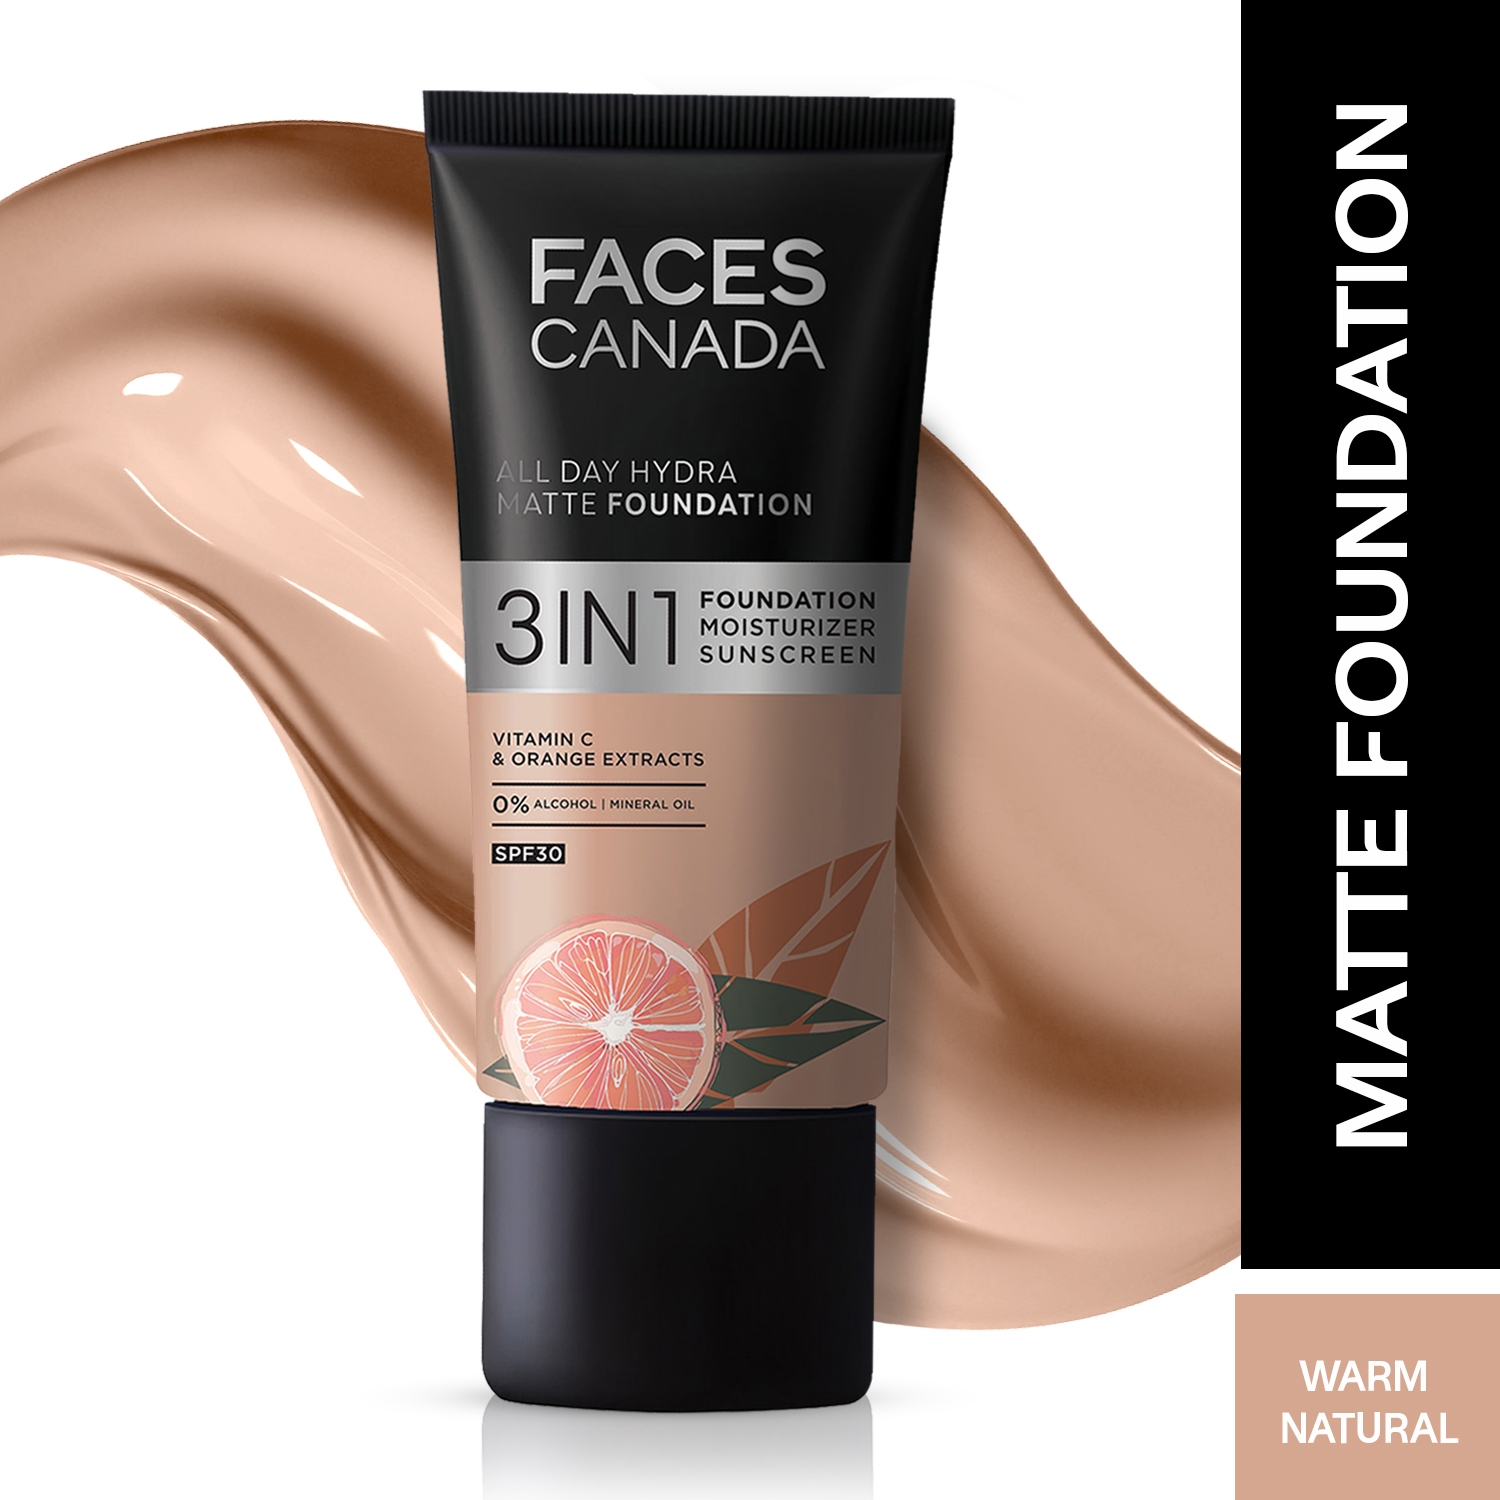 Faces Canada | Faces Canada All Day Hydra Matte Foundation - 21 Warm Natural (25ml)